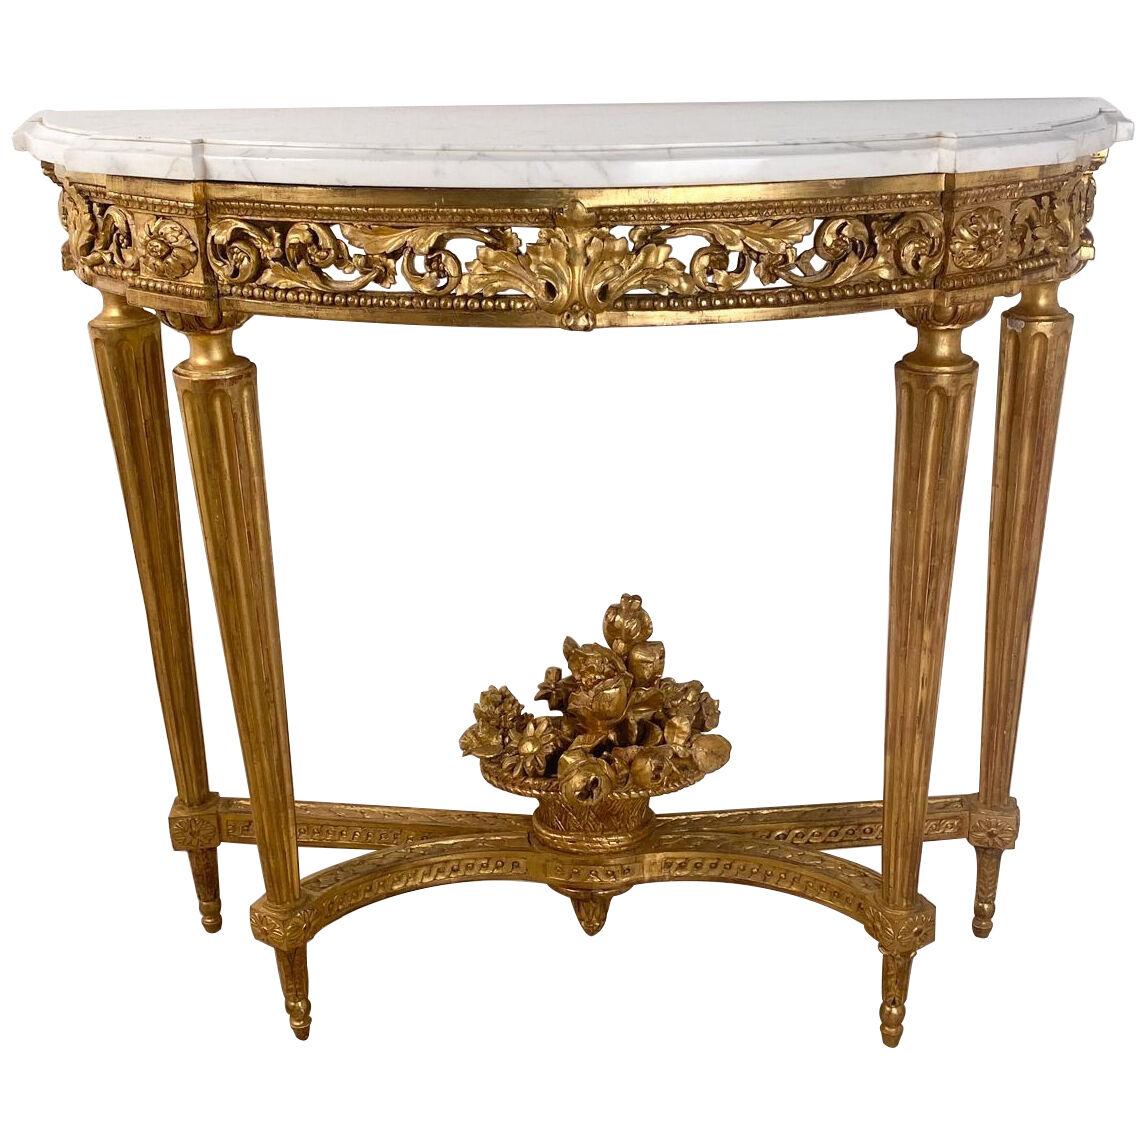 Louis XVI Giltwood Console with White Marble Top, France circa 1780